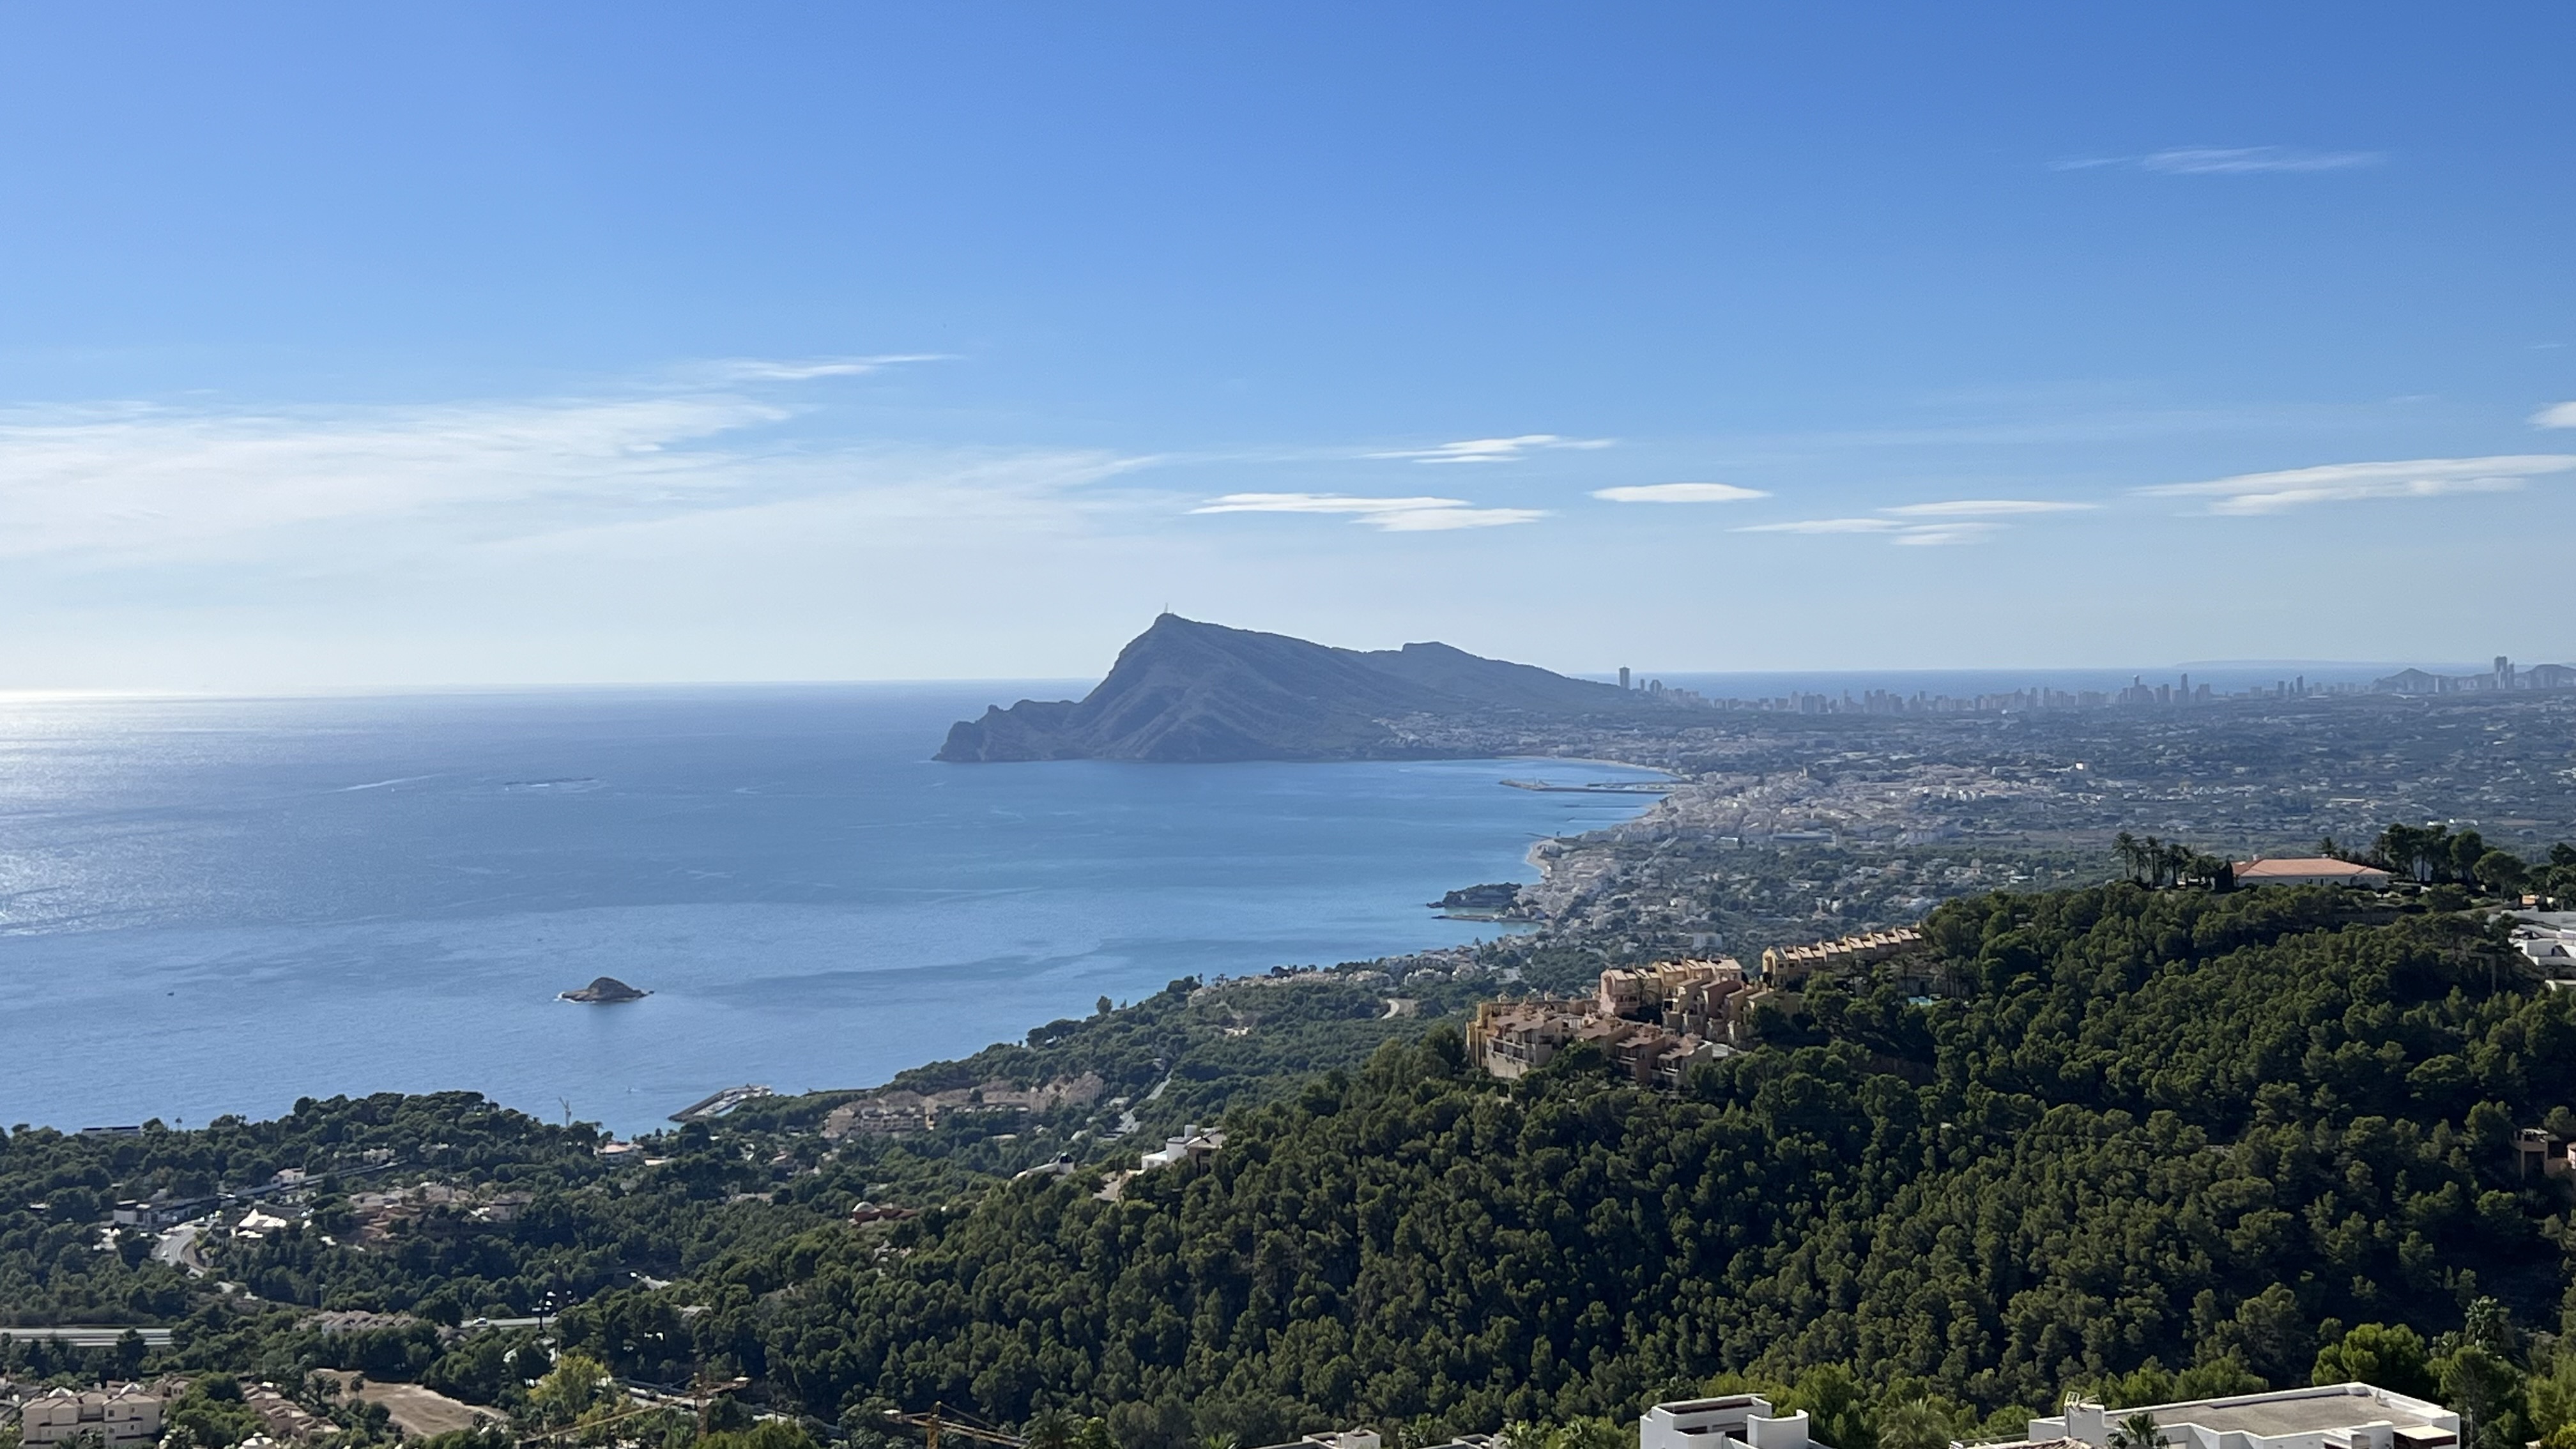 Luxurious and spacious 3-bedroom apartment with spectacular terraces in the exclusive Altea Hills Urbanization with incredible views of the sea and mountains